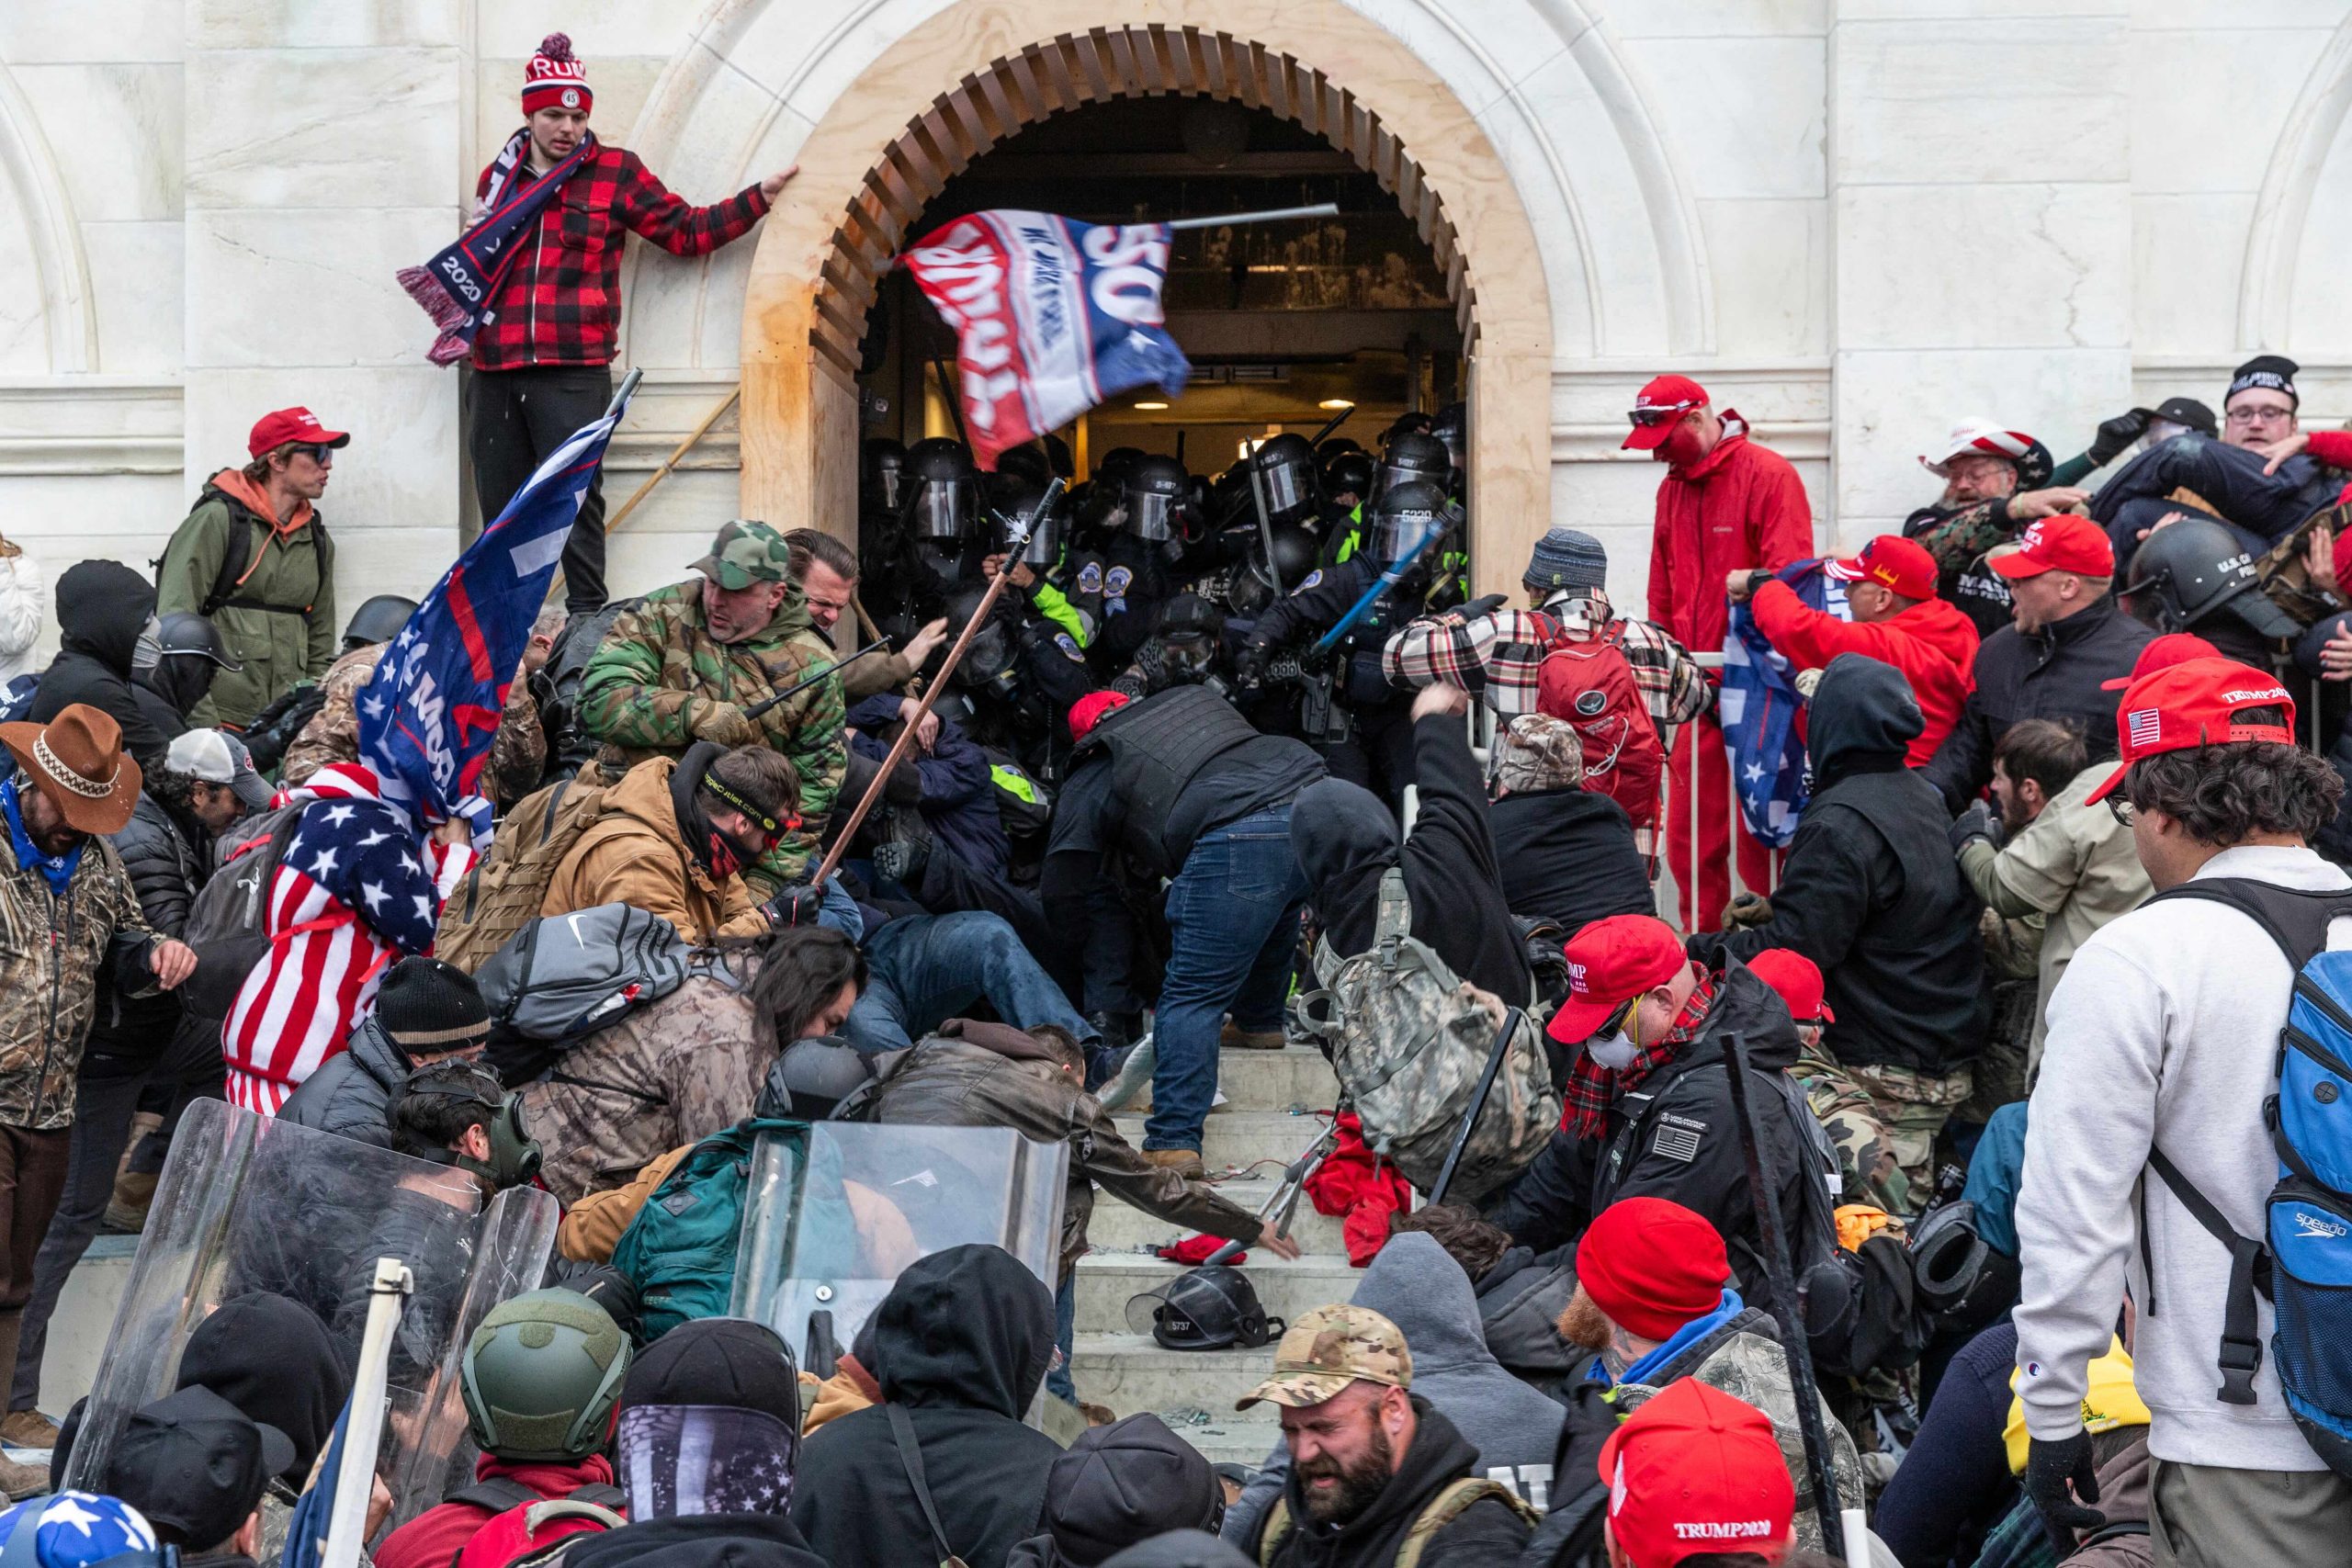 Rioters clash with police as they attempt to enter the U.S. Capitol by force.